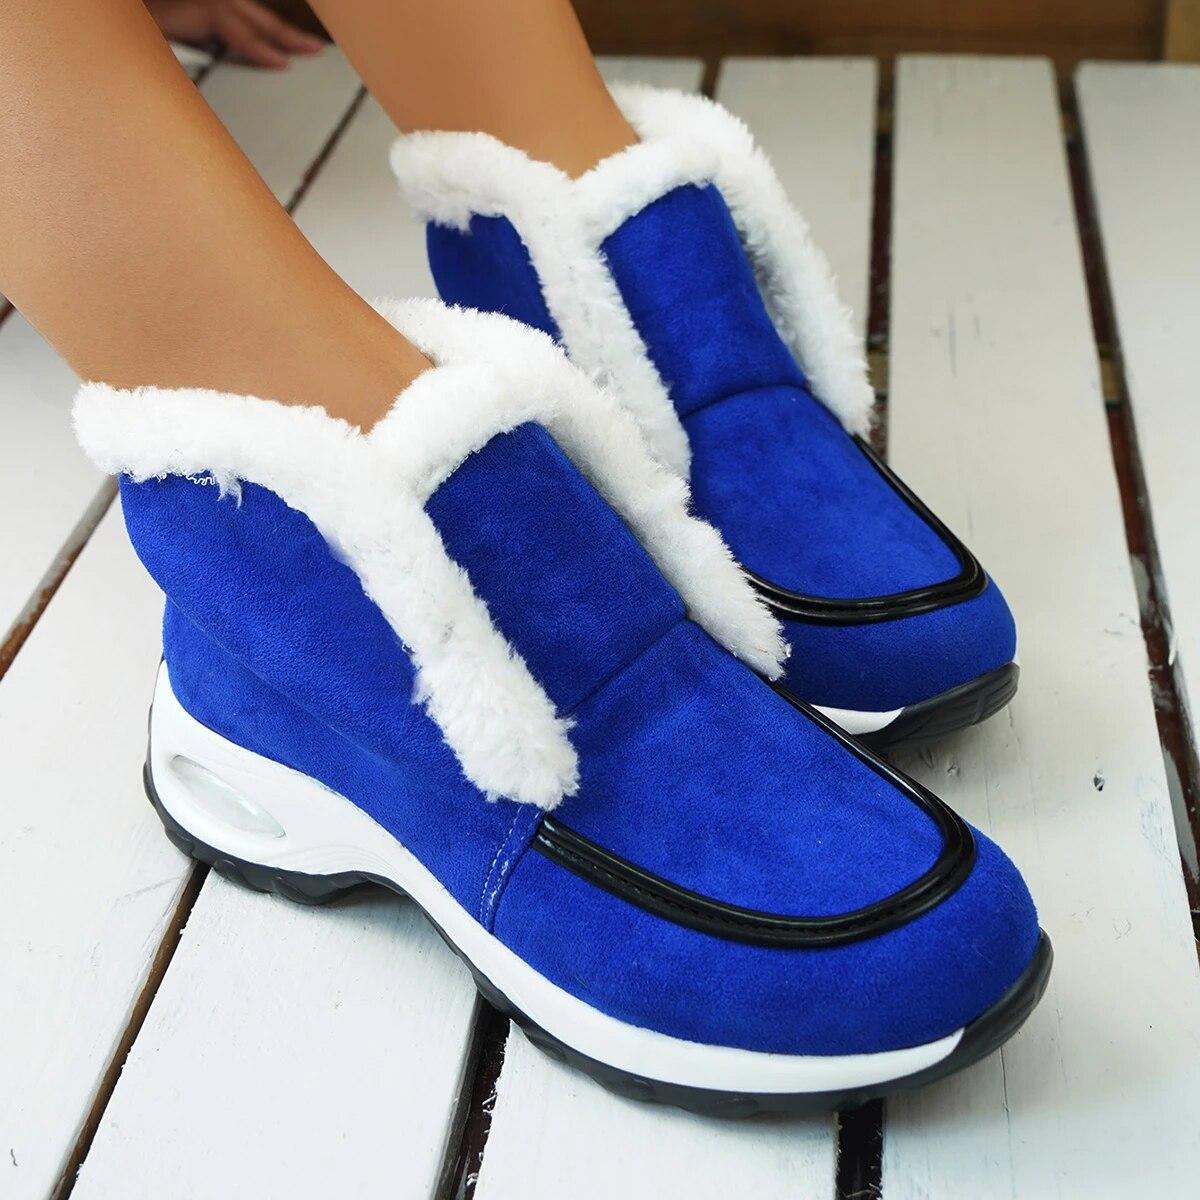 Women Boots Winter Snow Boots New High Quality Warm Plush Winter Boots Ladies Flats Heel Comfort Fashion Suede Cotton Sh